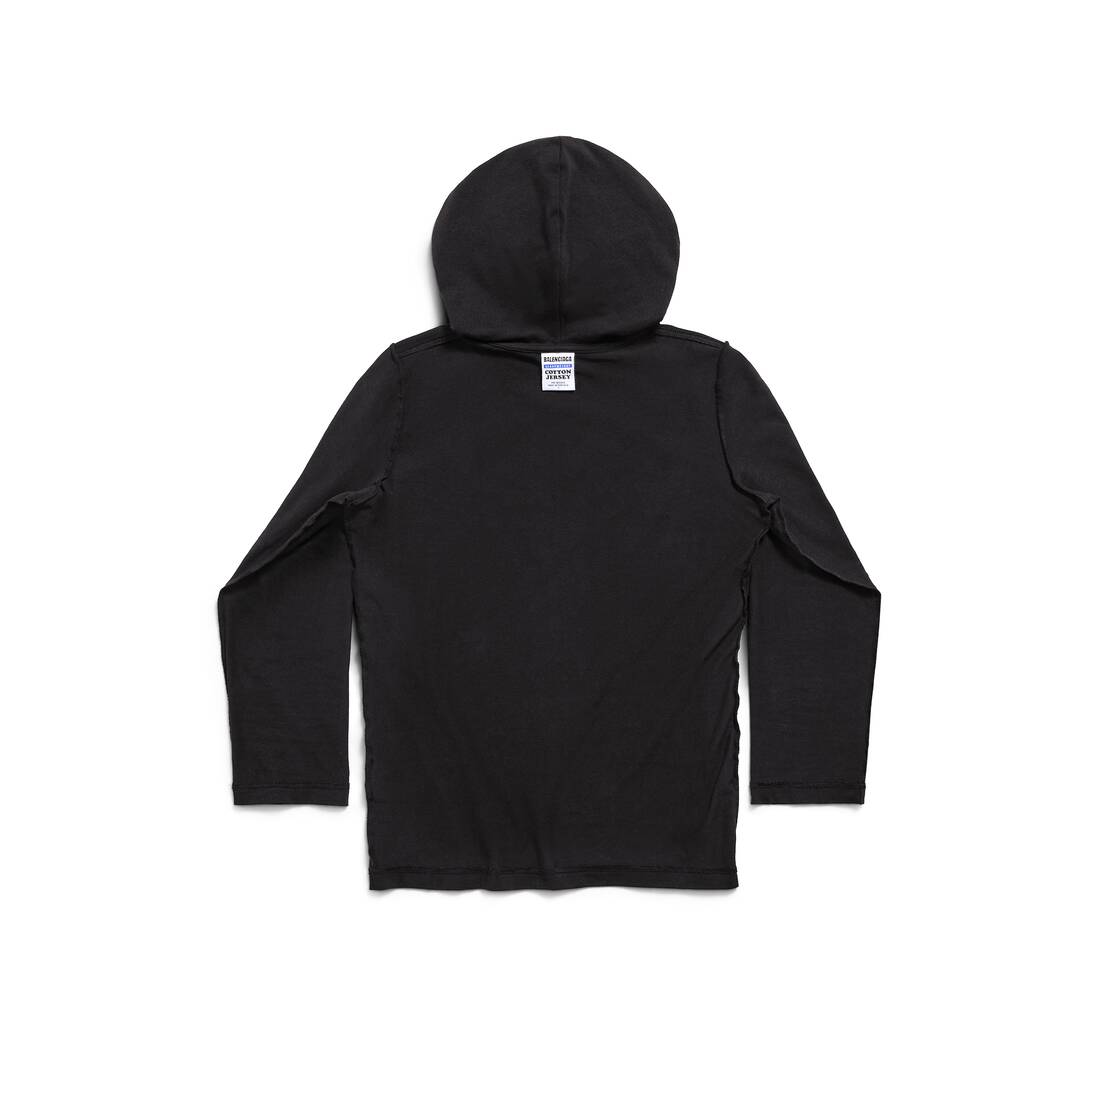 Inside-out Long Sleeve Hooded T-shirt Fitted in Black